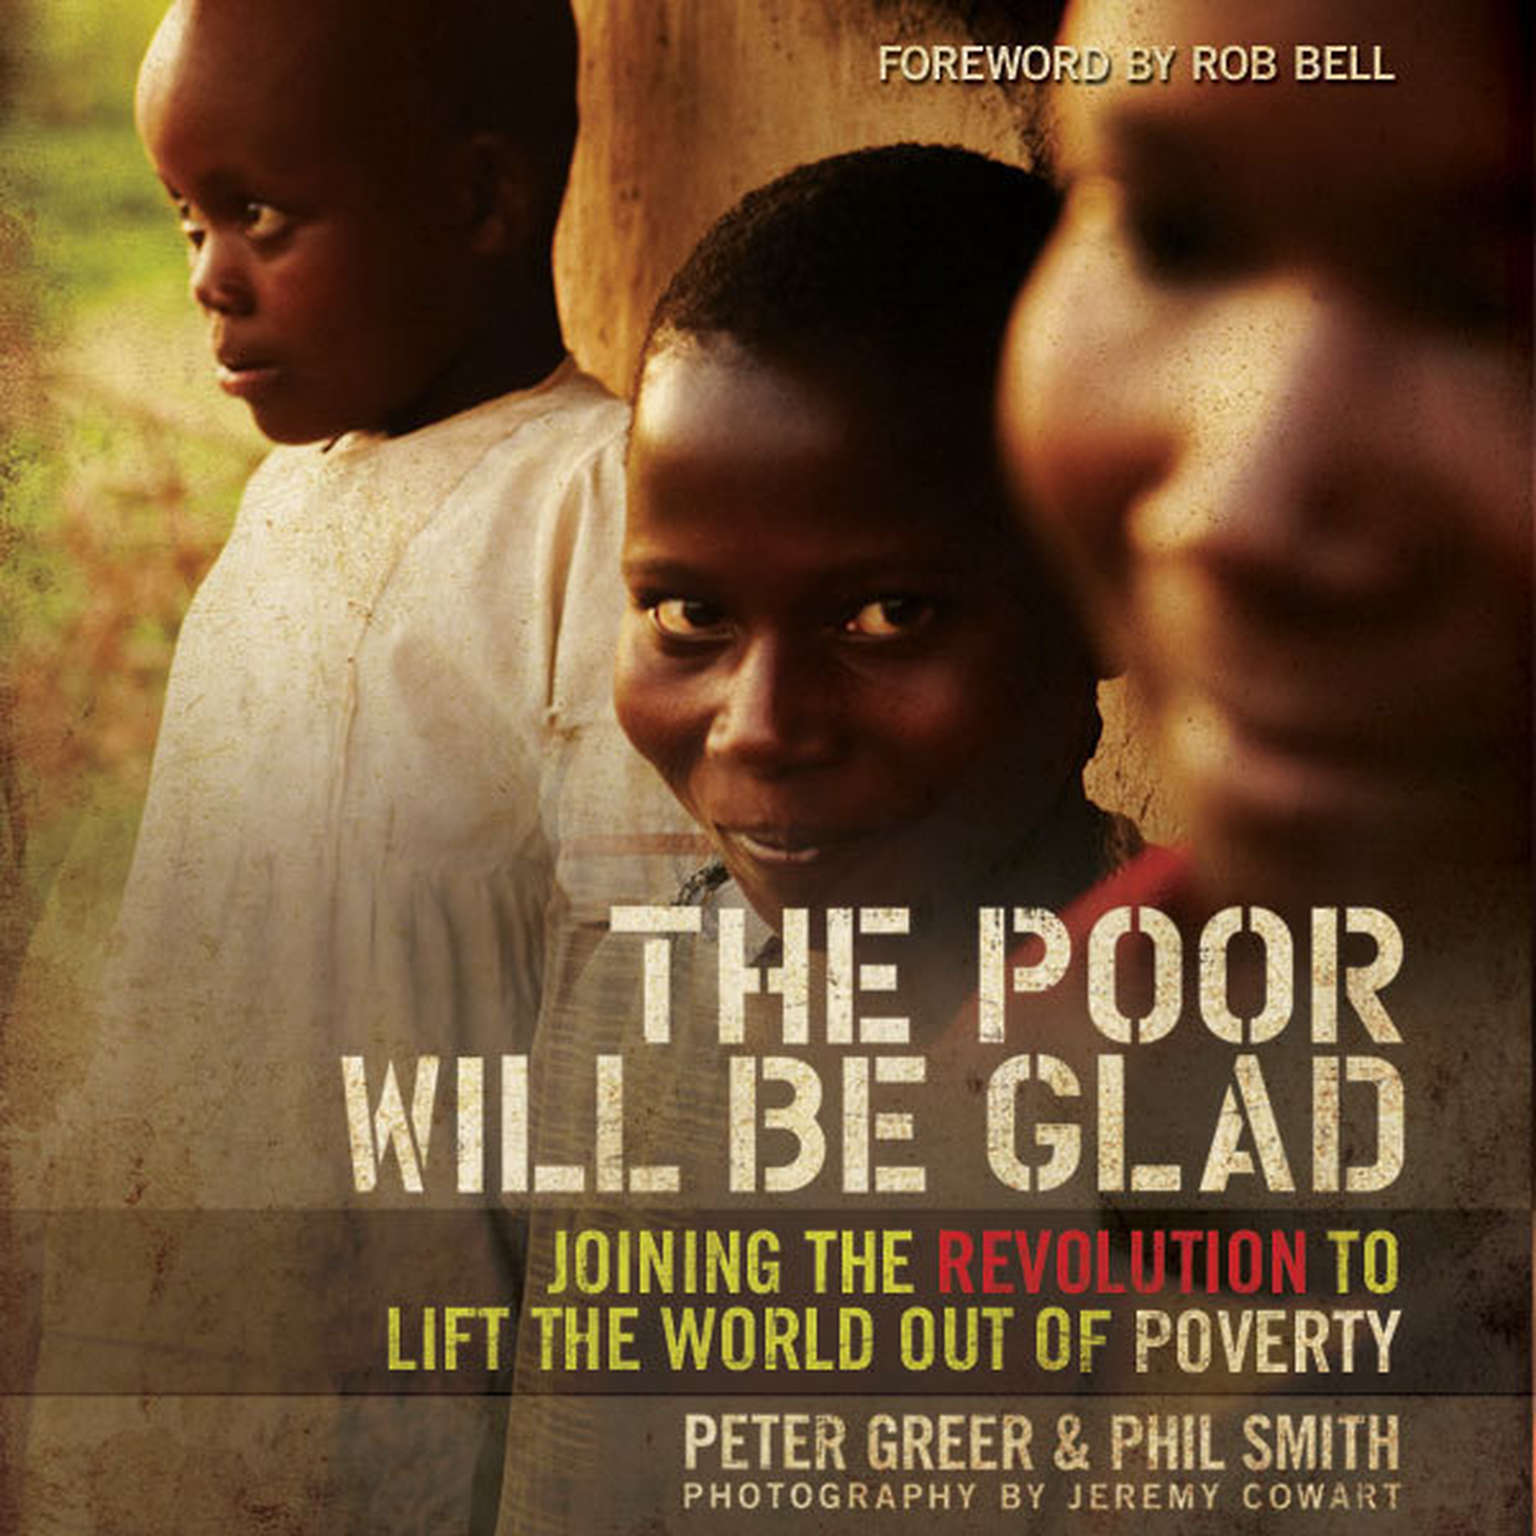 The Poor Will Be Glad: Joining the Revolution to Lift the World Out of Poverty Audiobook, by Peter Greer